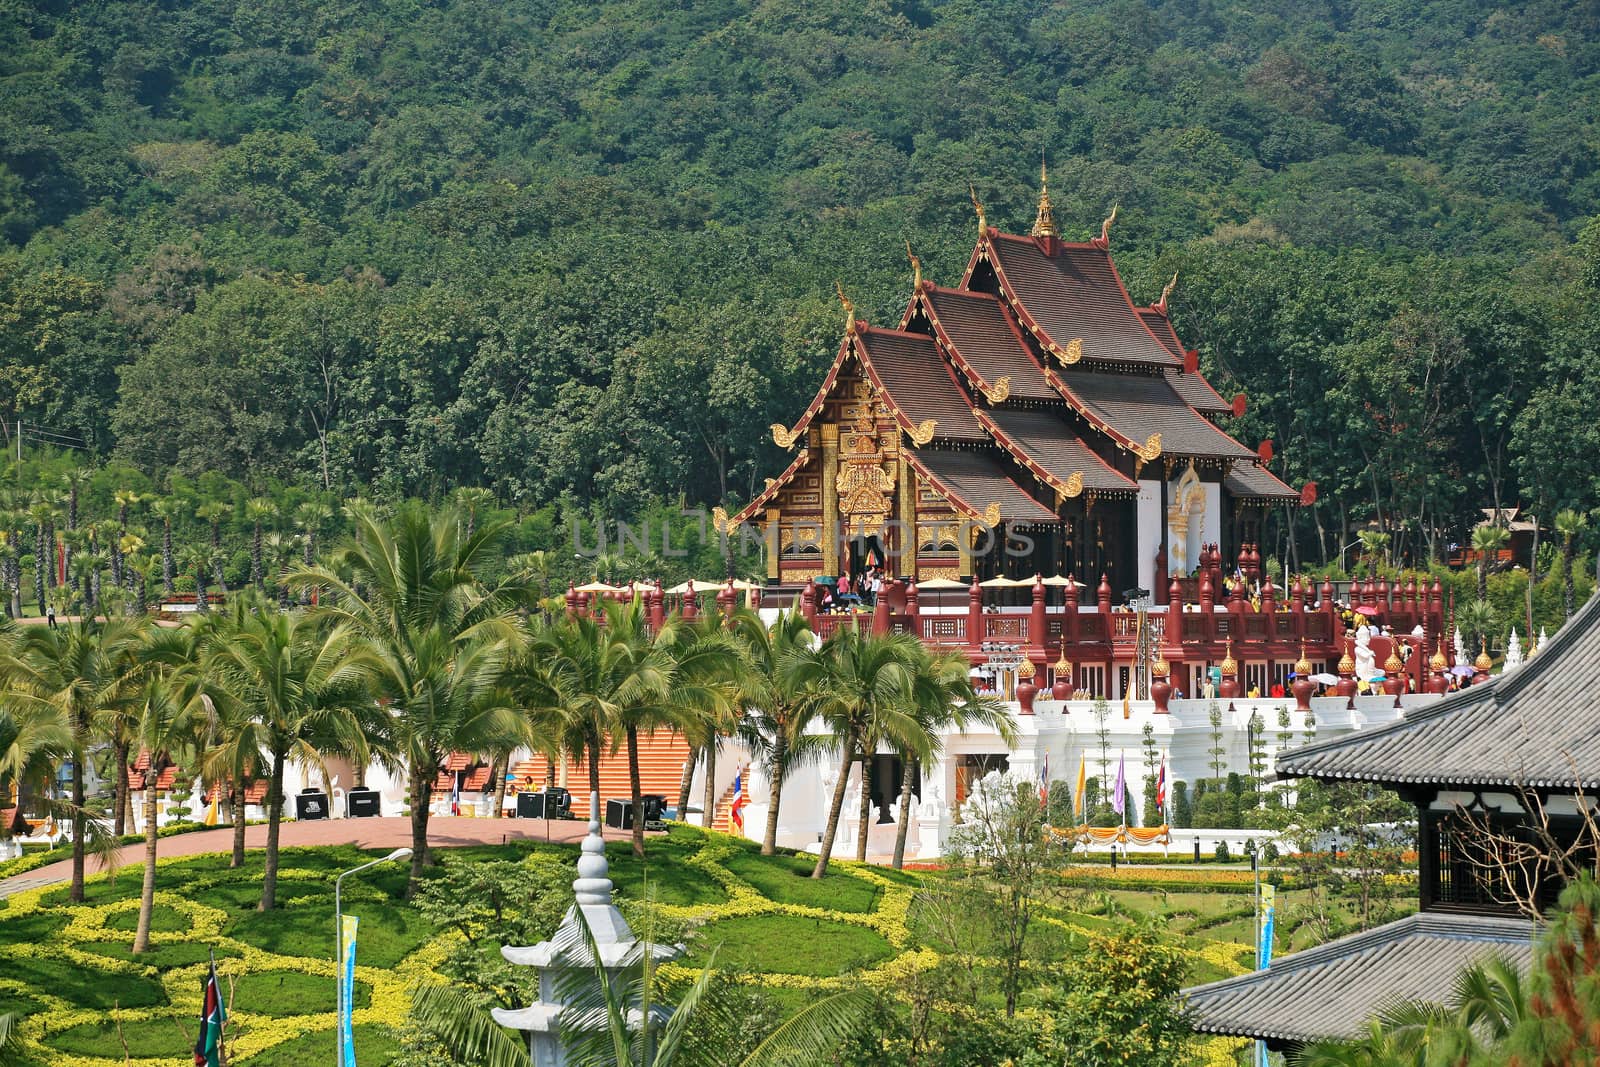 Traditional thai architecture in the Lanna style , Royal Pavilion (Ho Kum Luang) at Royal Flora Expo, Chiang Mai, Thailand